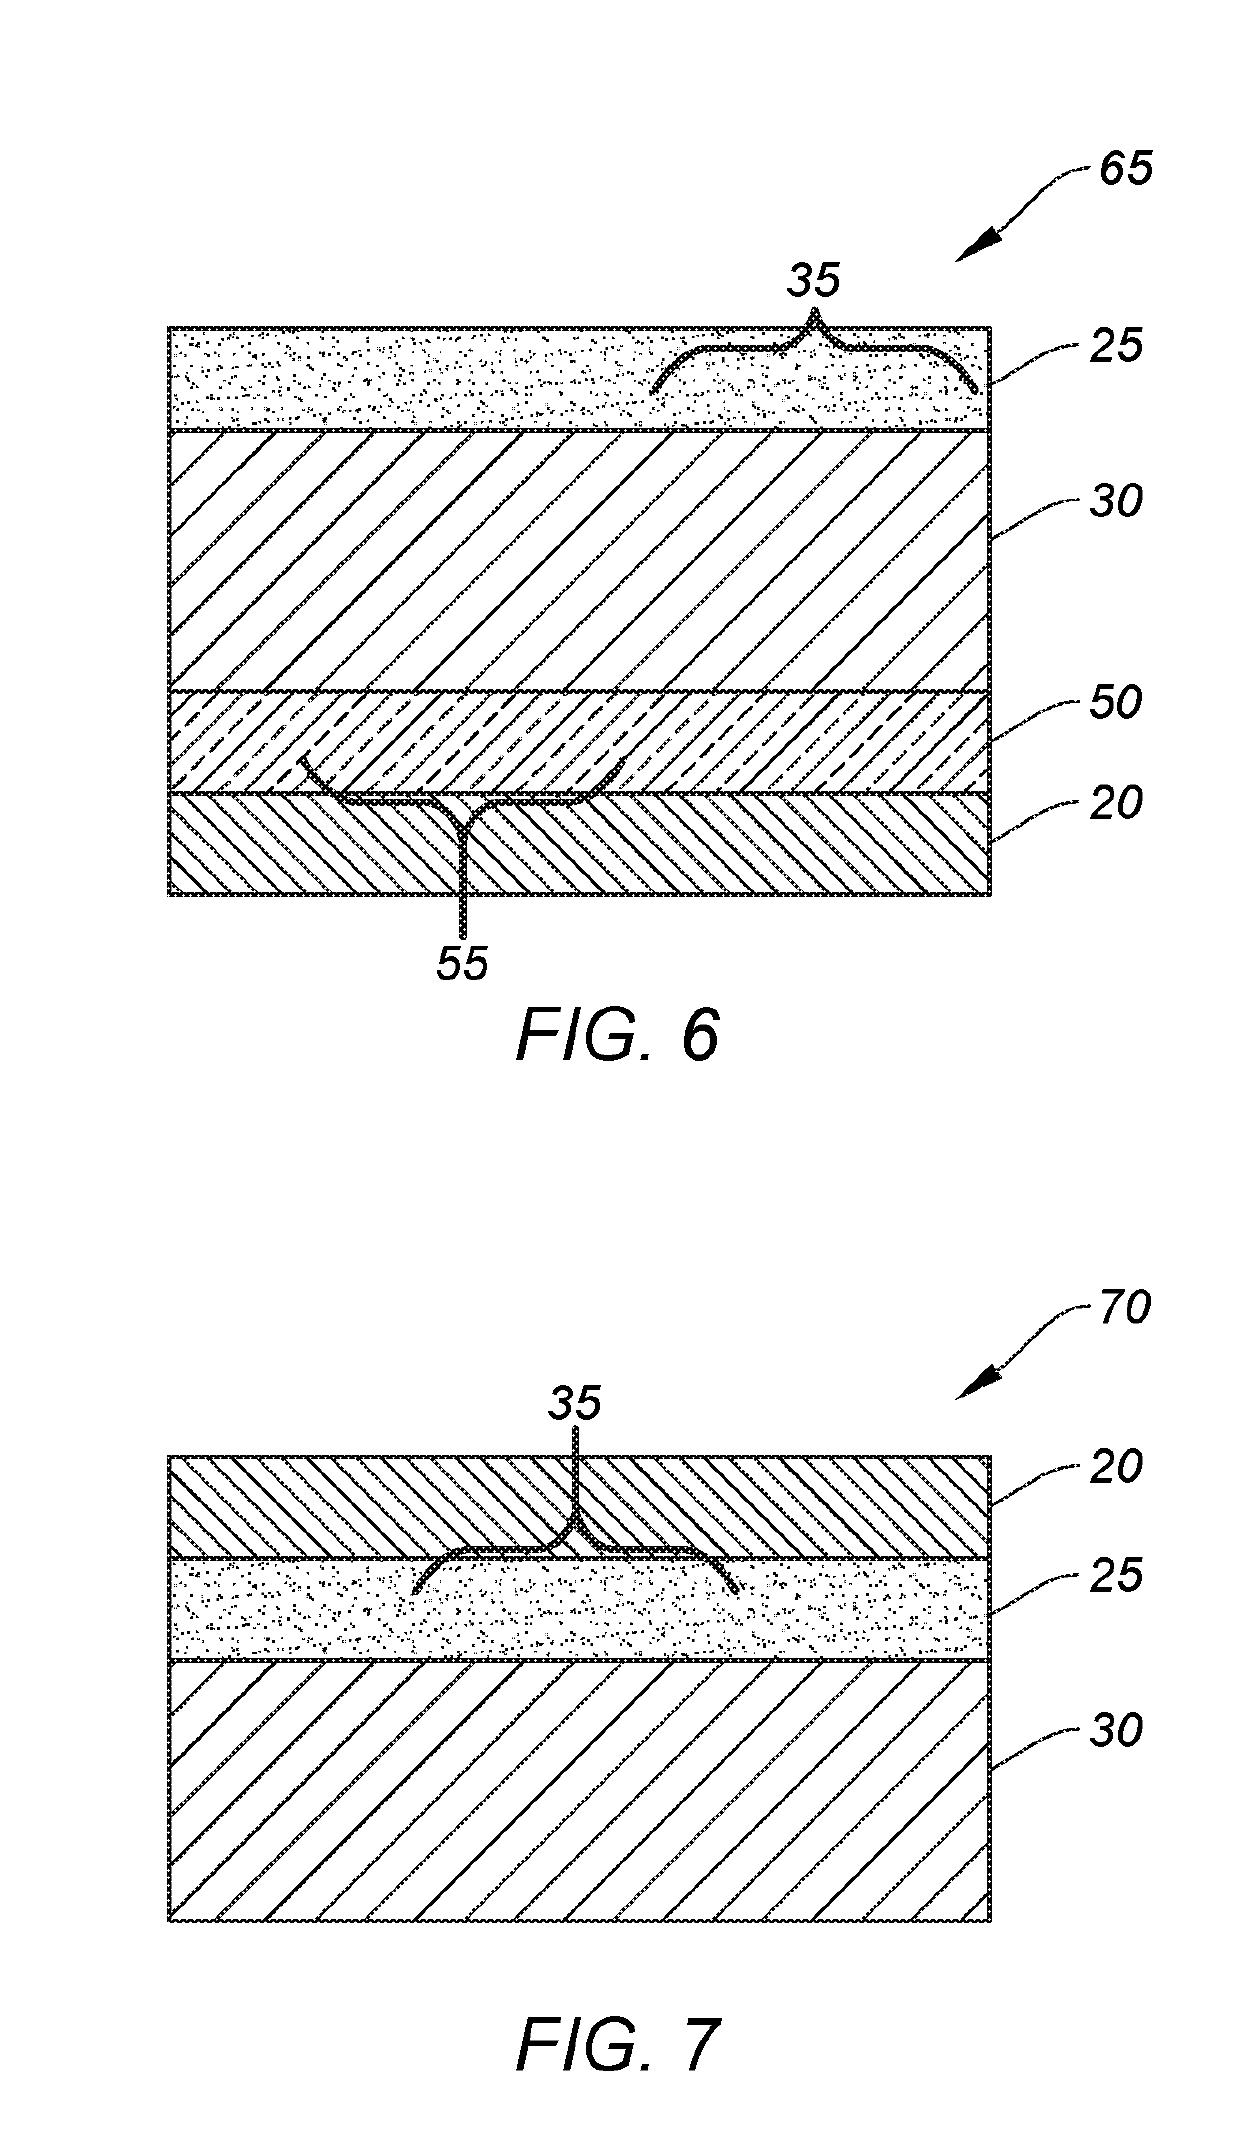 Inertial piezoelectric capacitor with co-planar patterned electrodes